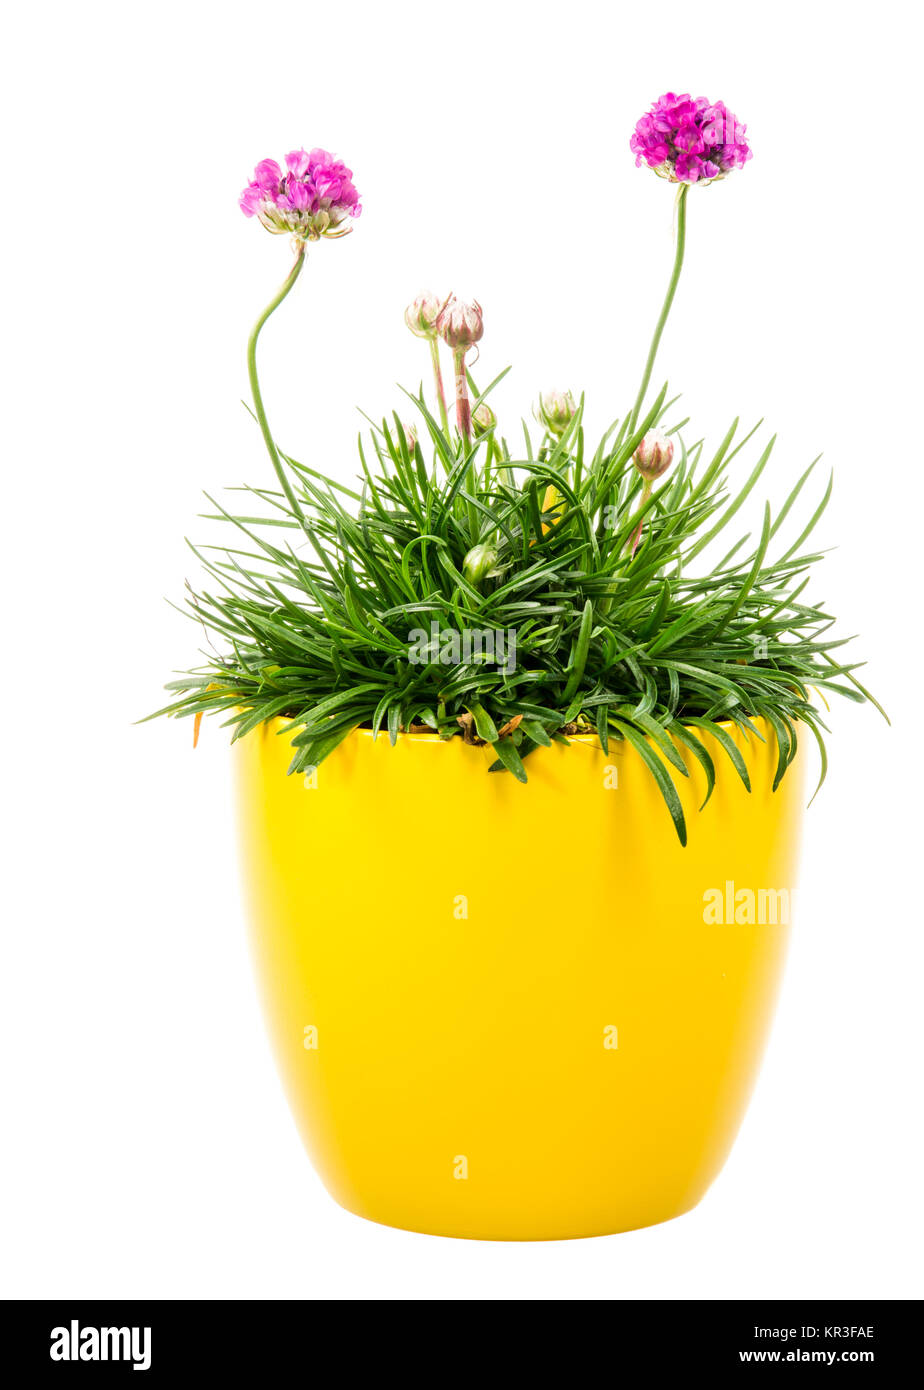 Pack of flowers Cut Out Stock Images & Pictures - Page 3 - Alamy